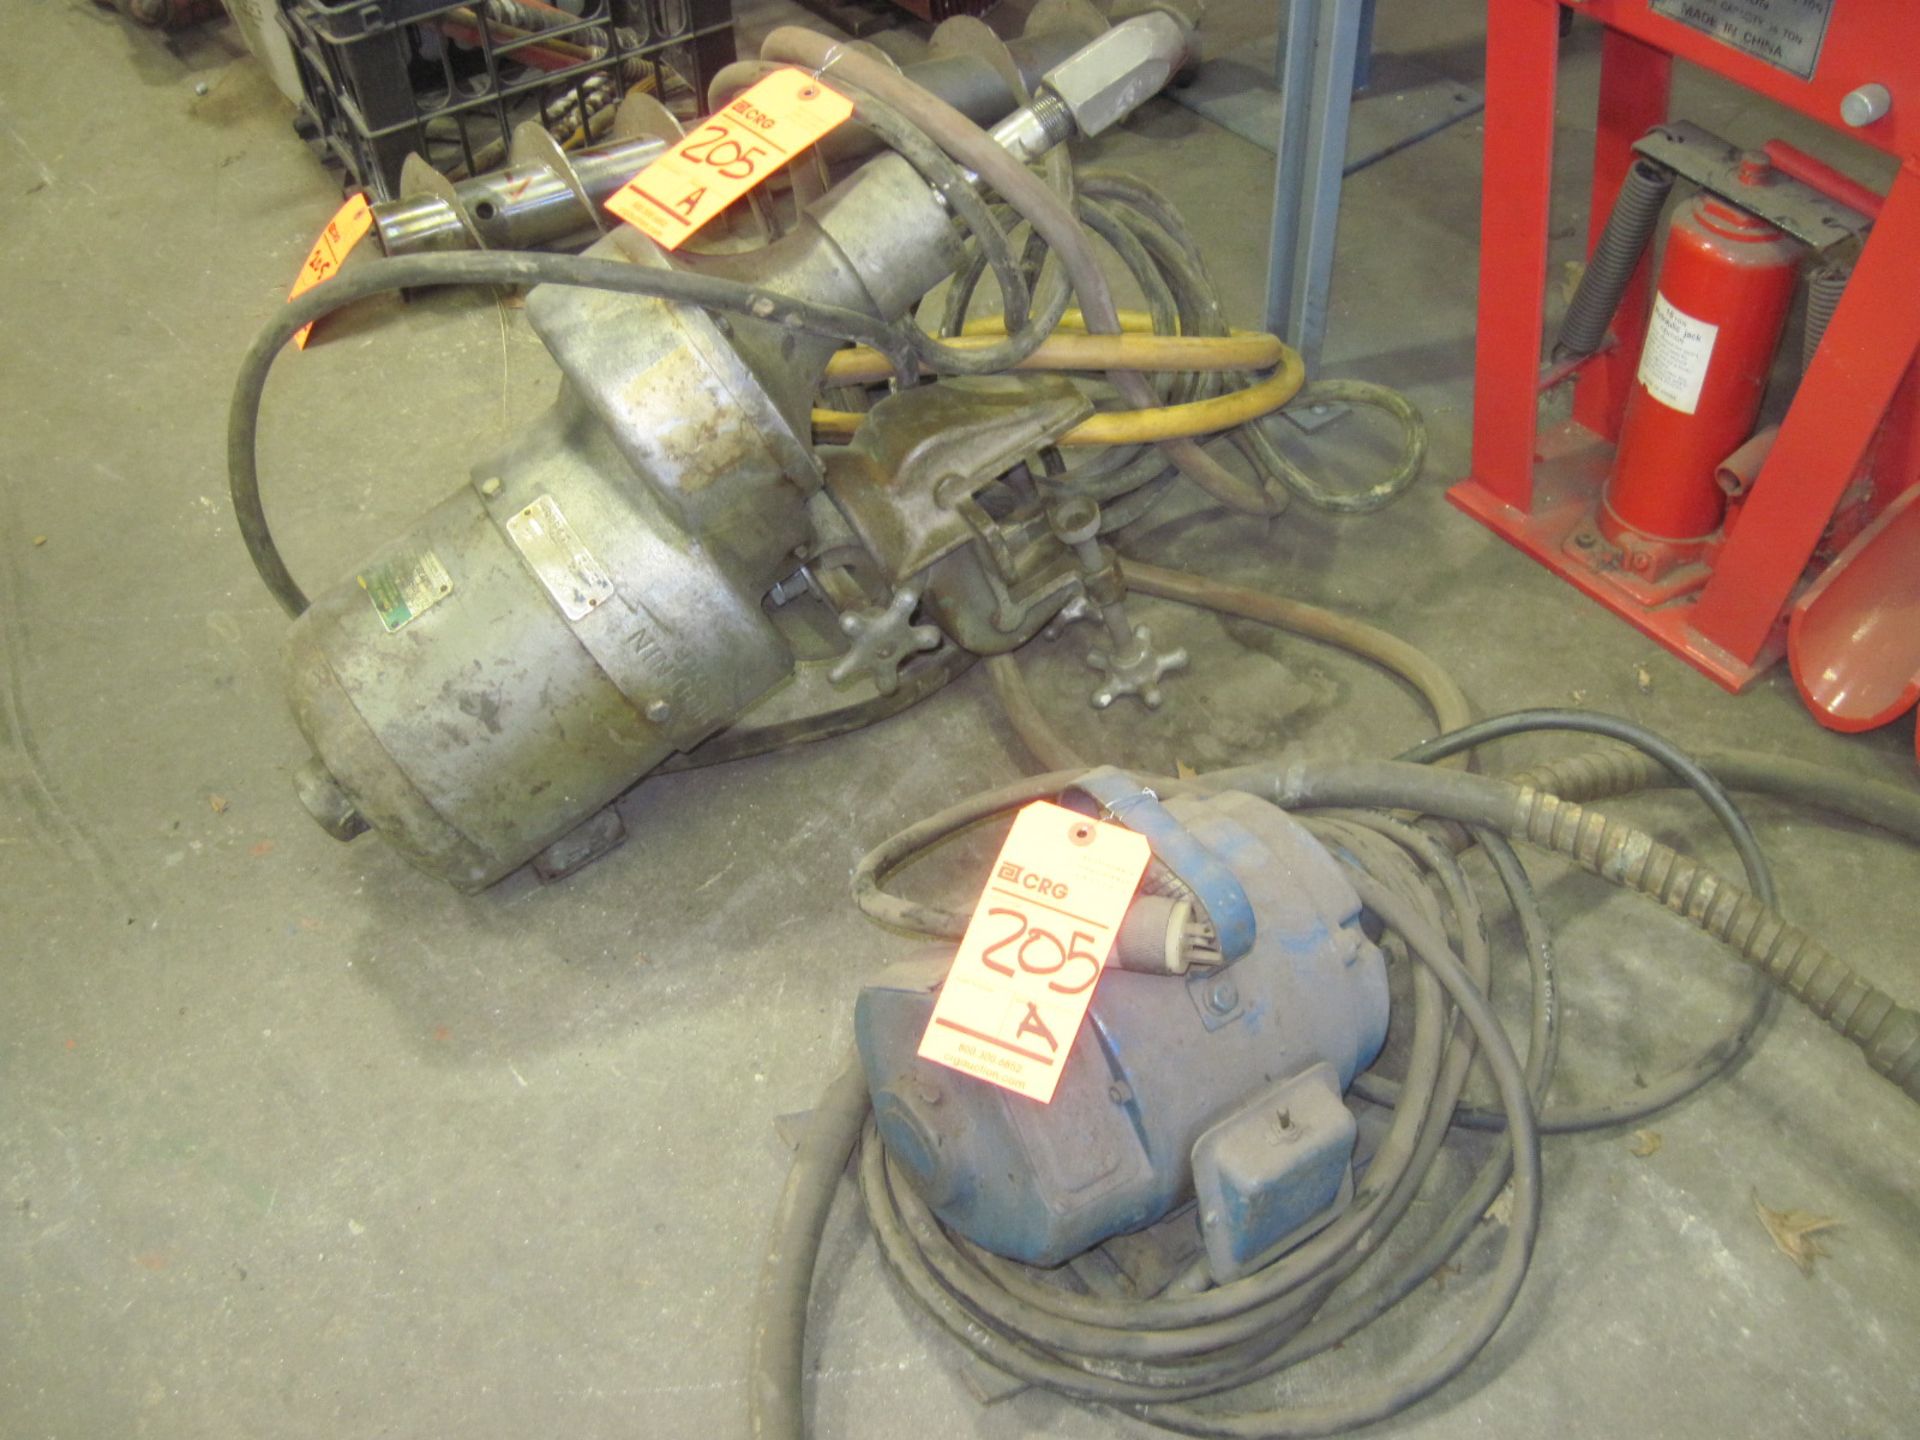 Lightning mixer m/n 240015, and Arnesson electric chipping hammer